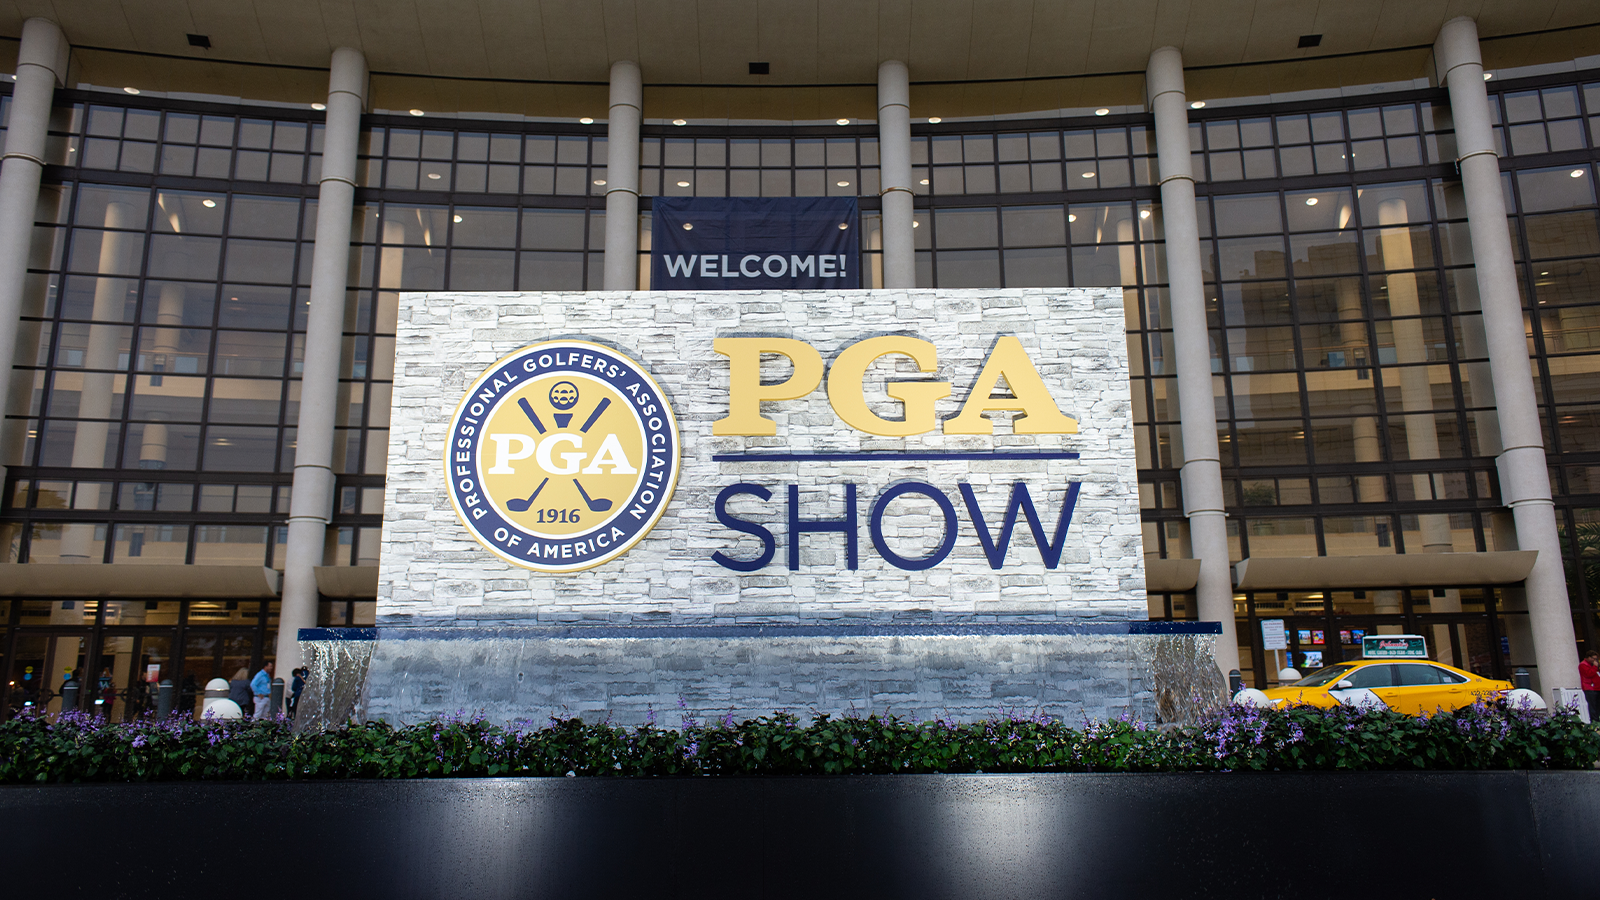 The PGA Show Signage during the 2022 PGA Show at the Orange County Convention Center on January 26, 2022 in Orlando, FL. (Photo by Montana Pritchard/PGA of America)